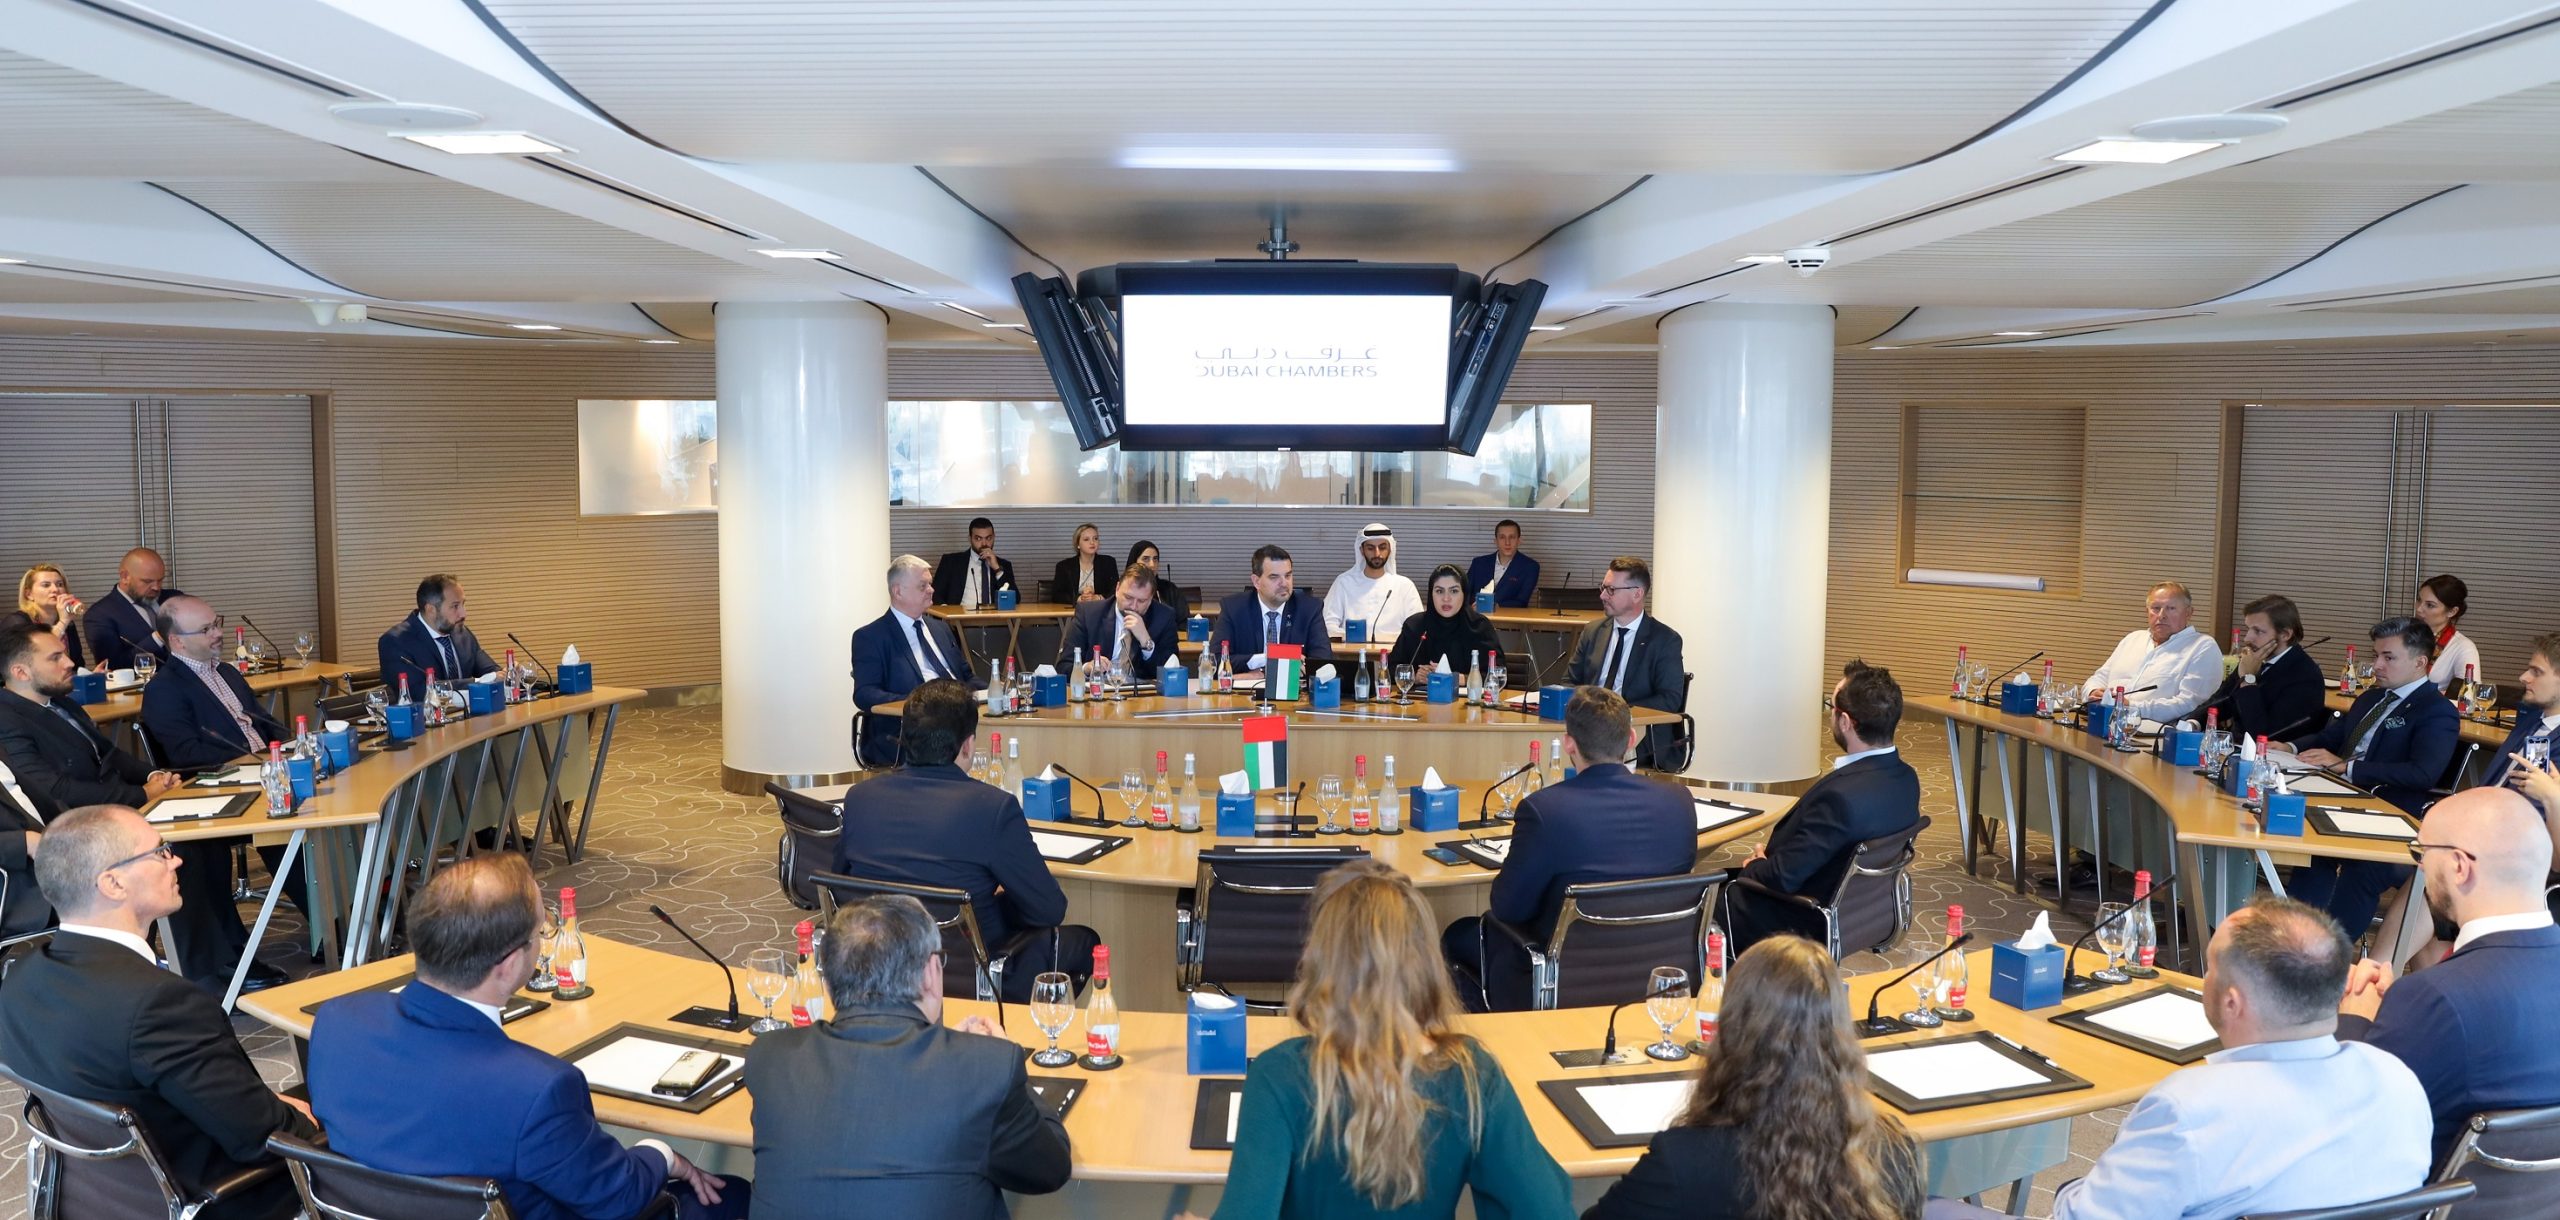 Dubai Chamber of Commerce launches Polish Business Council to promote economic partnerships